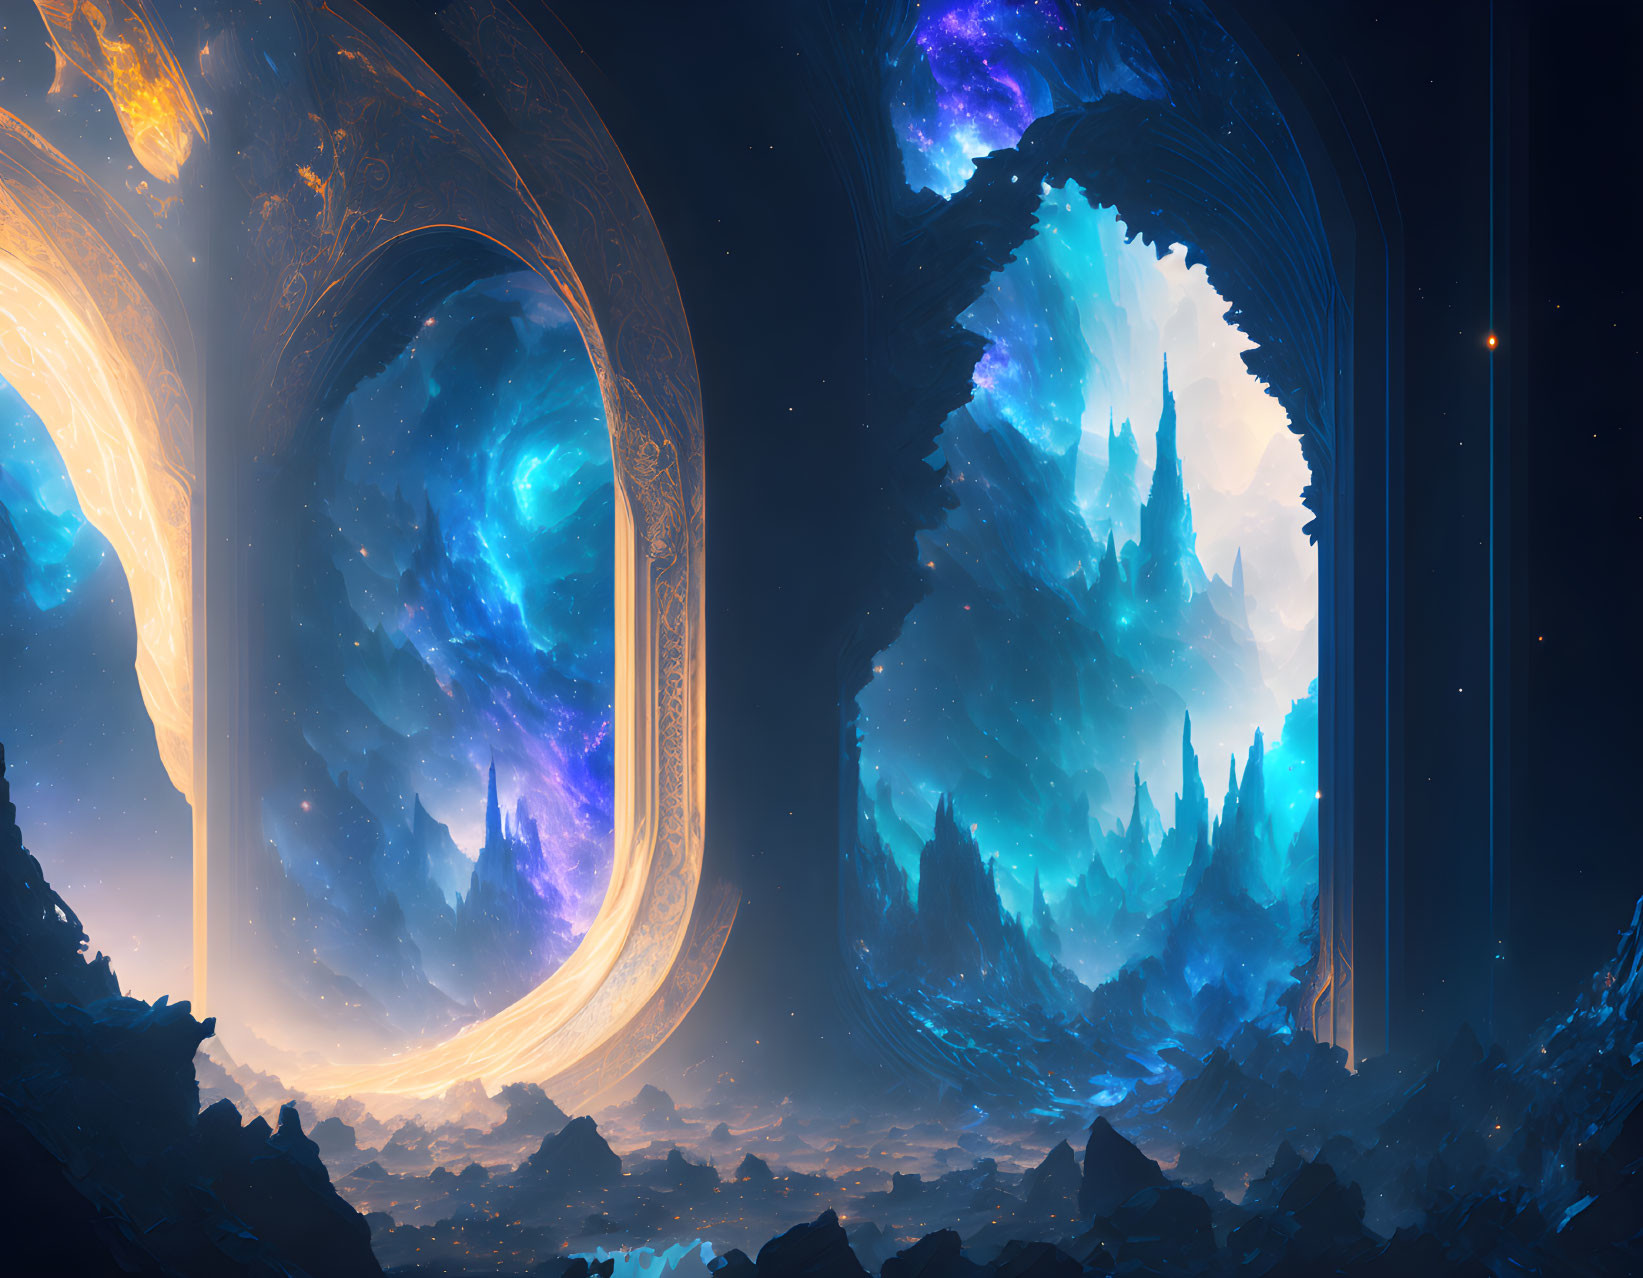 Fantastical cosmic landscape with ornate arches and celestial bodies